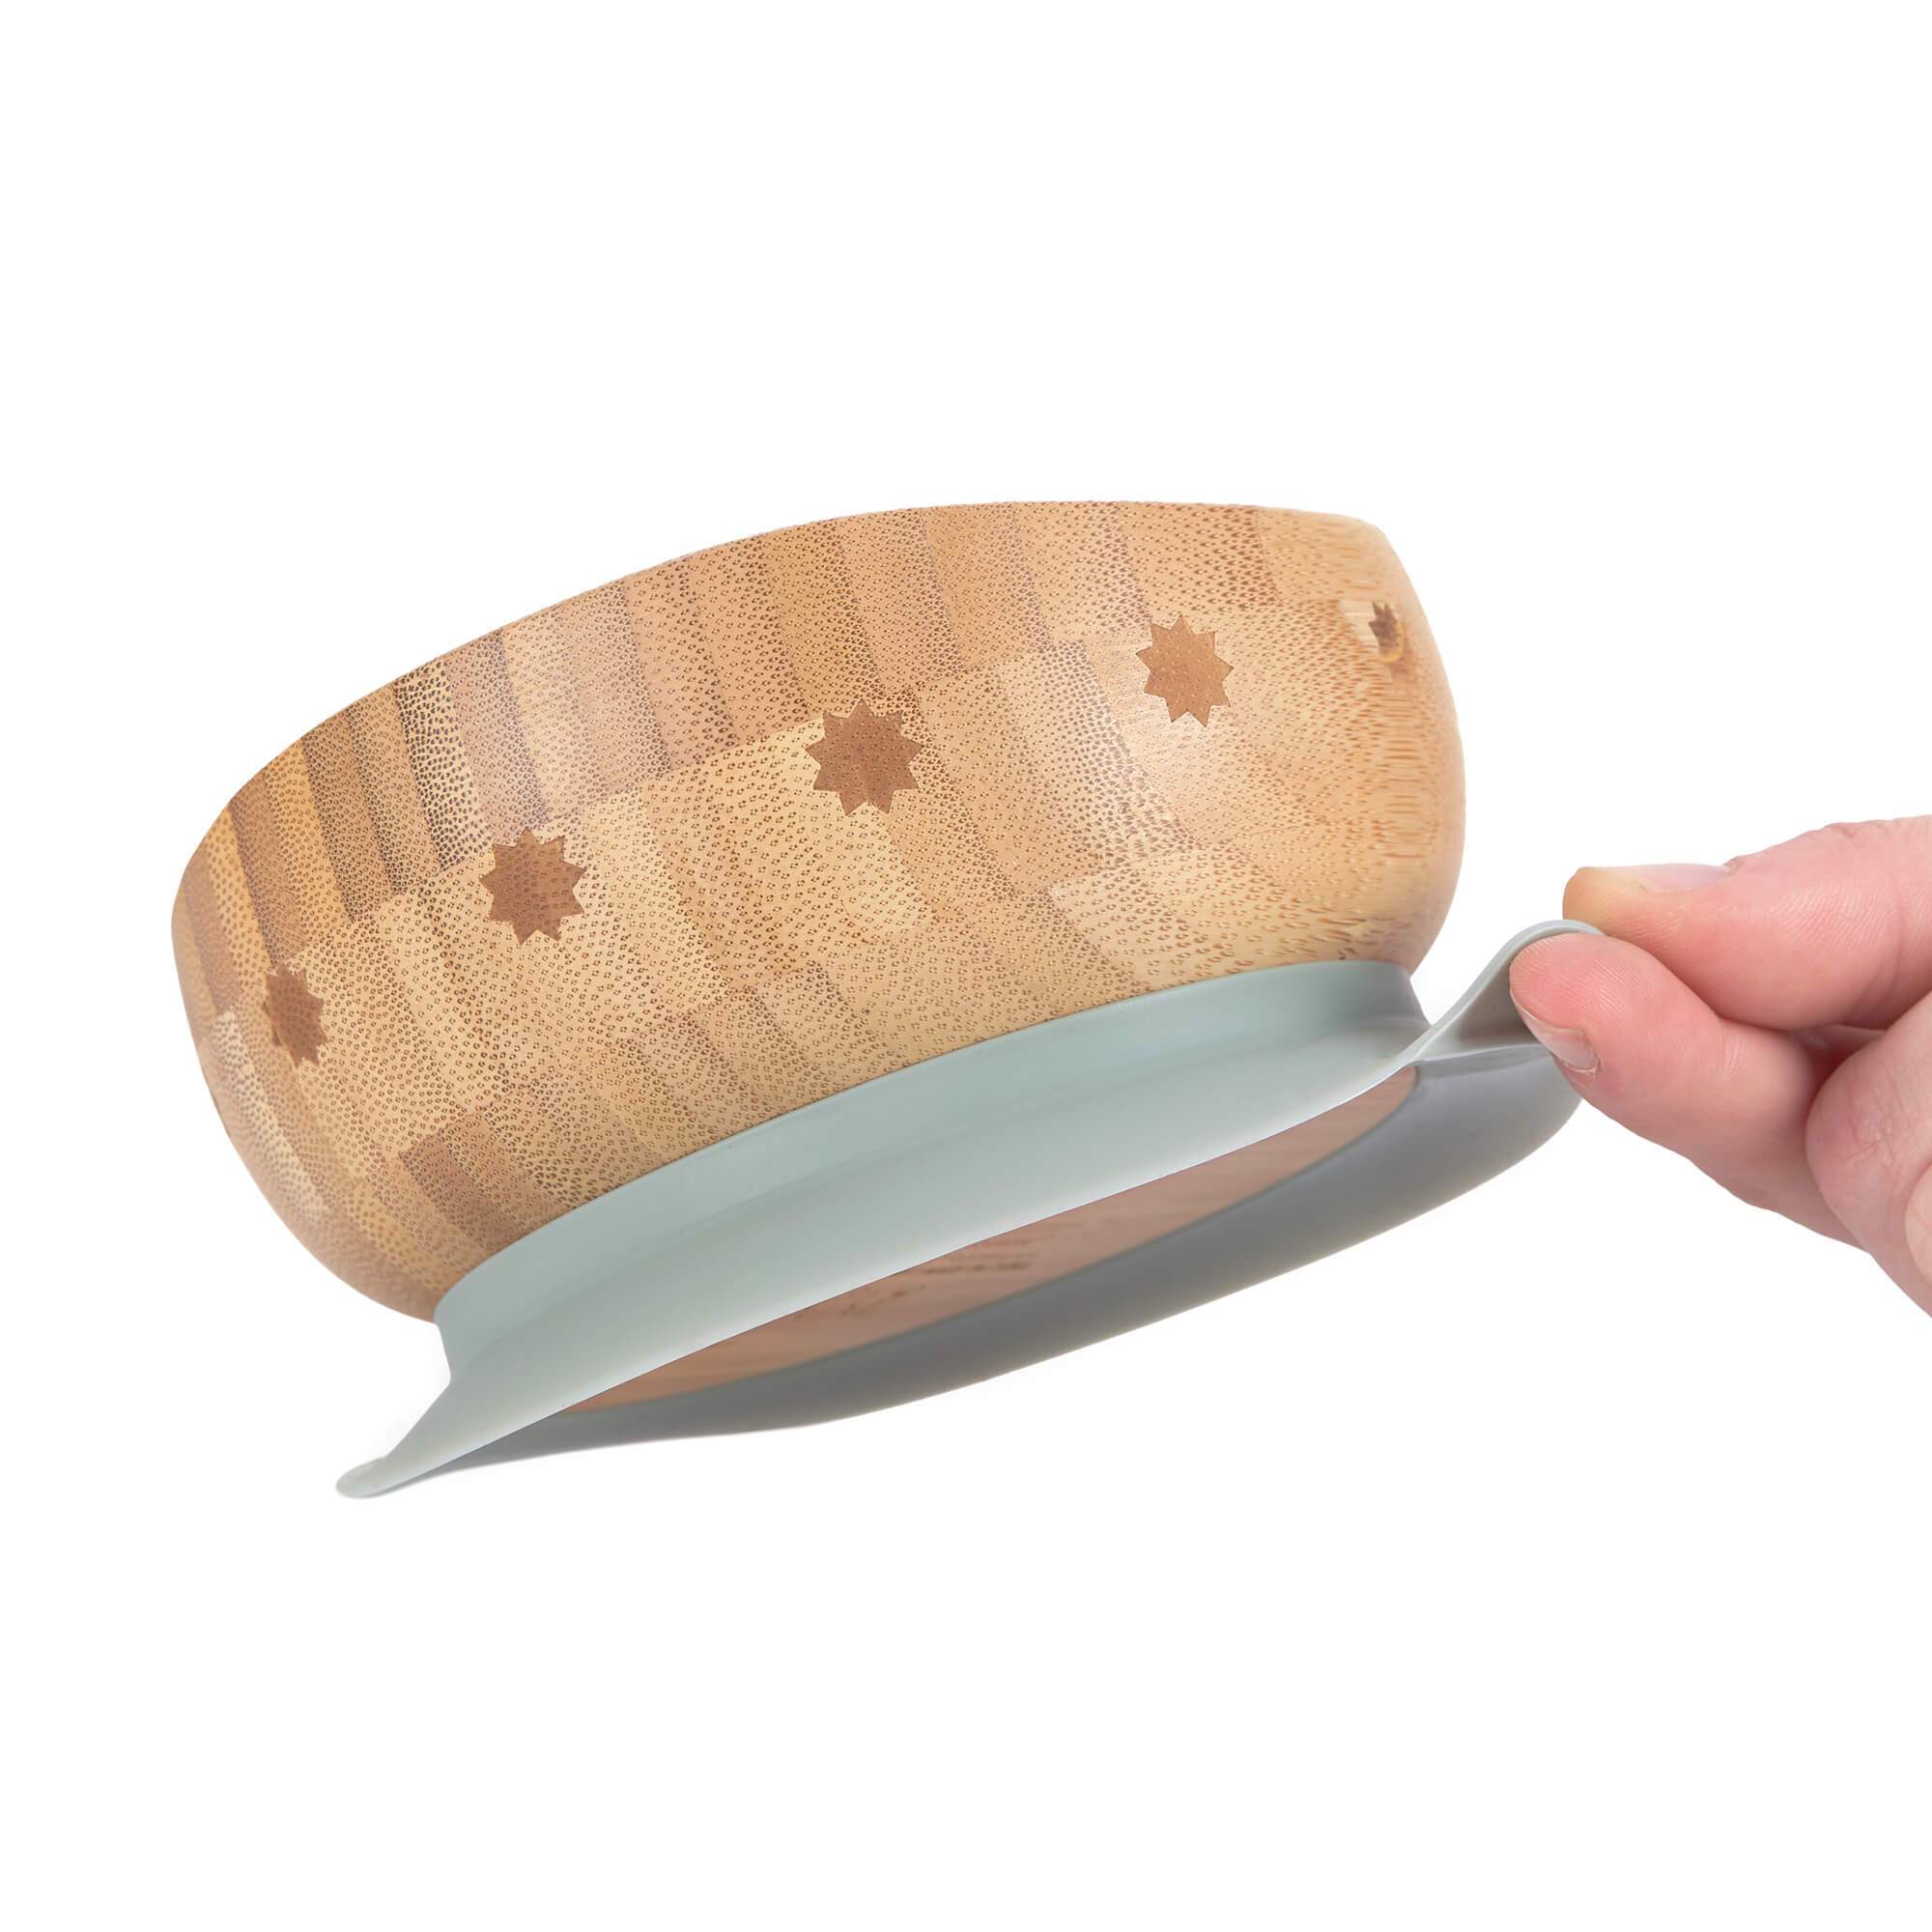 Children's bowl bamboo wood with silicone ring "Cat"